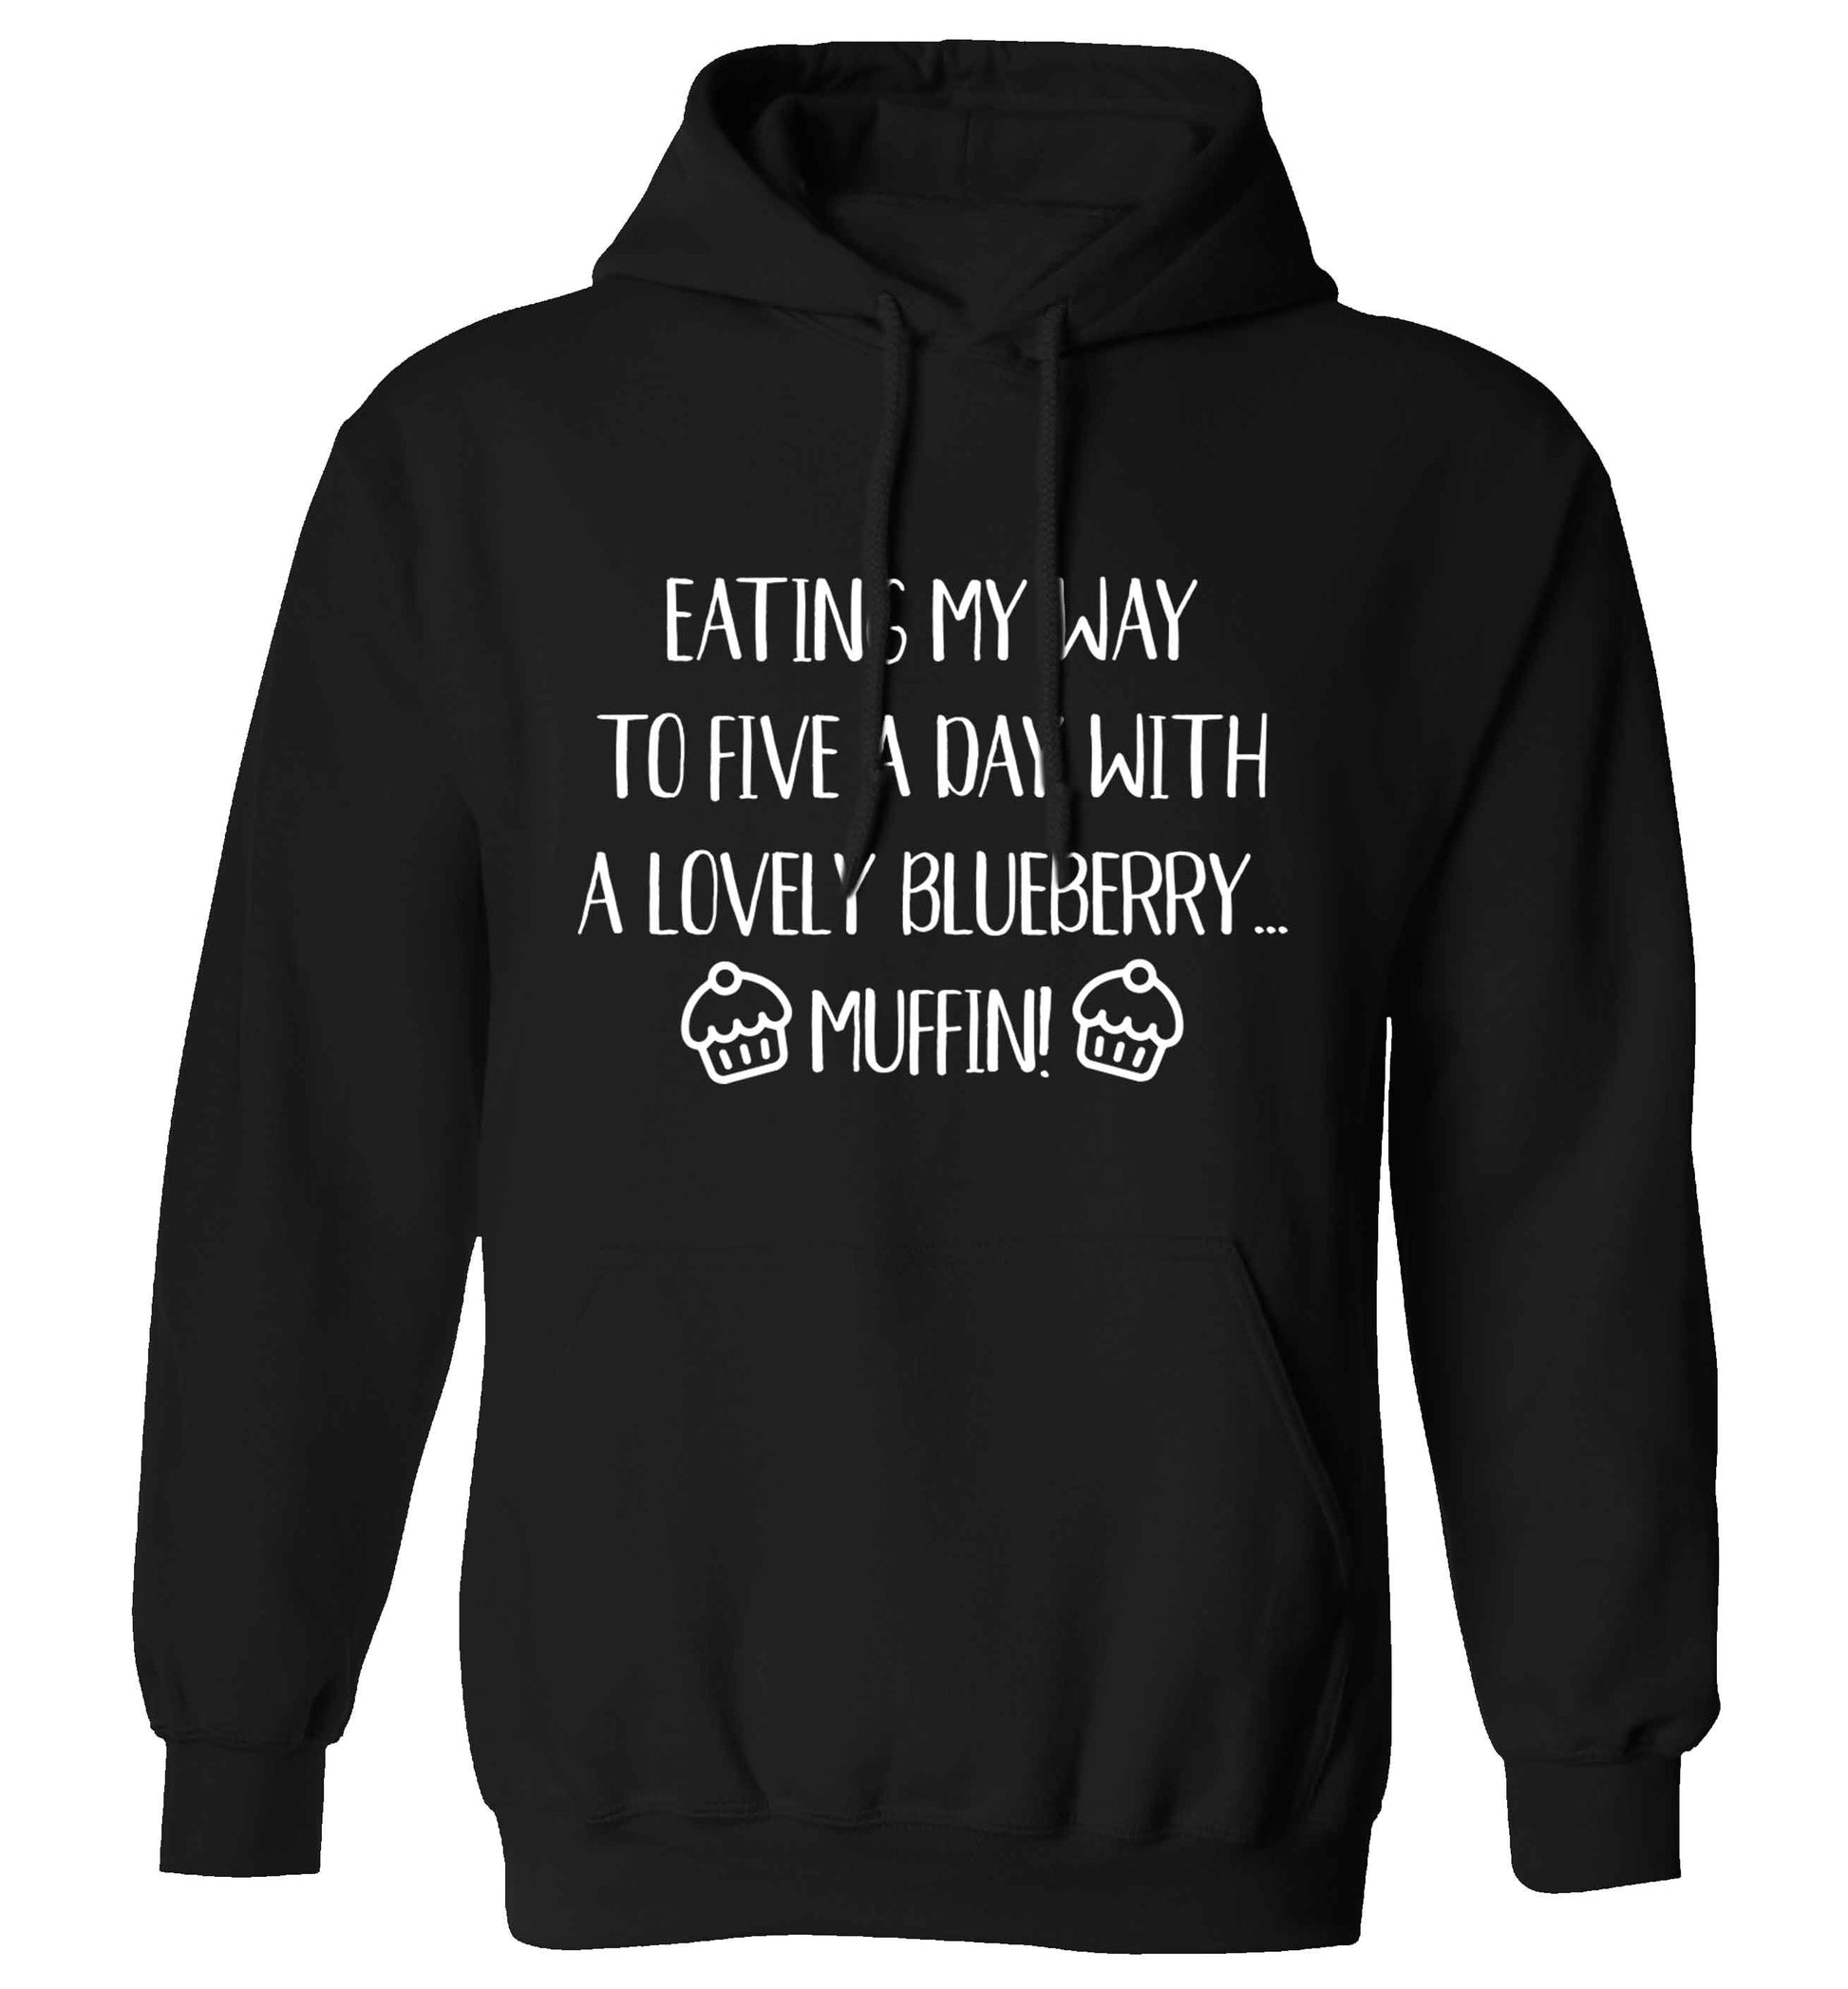 Eating my way to five a day with a lovely blueberry muffin adults unisex black hoodie 2XL